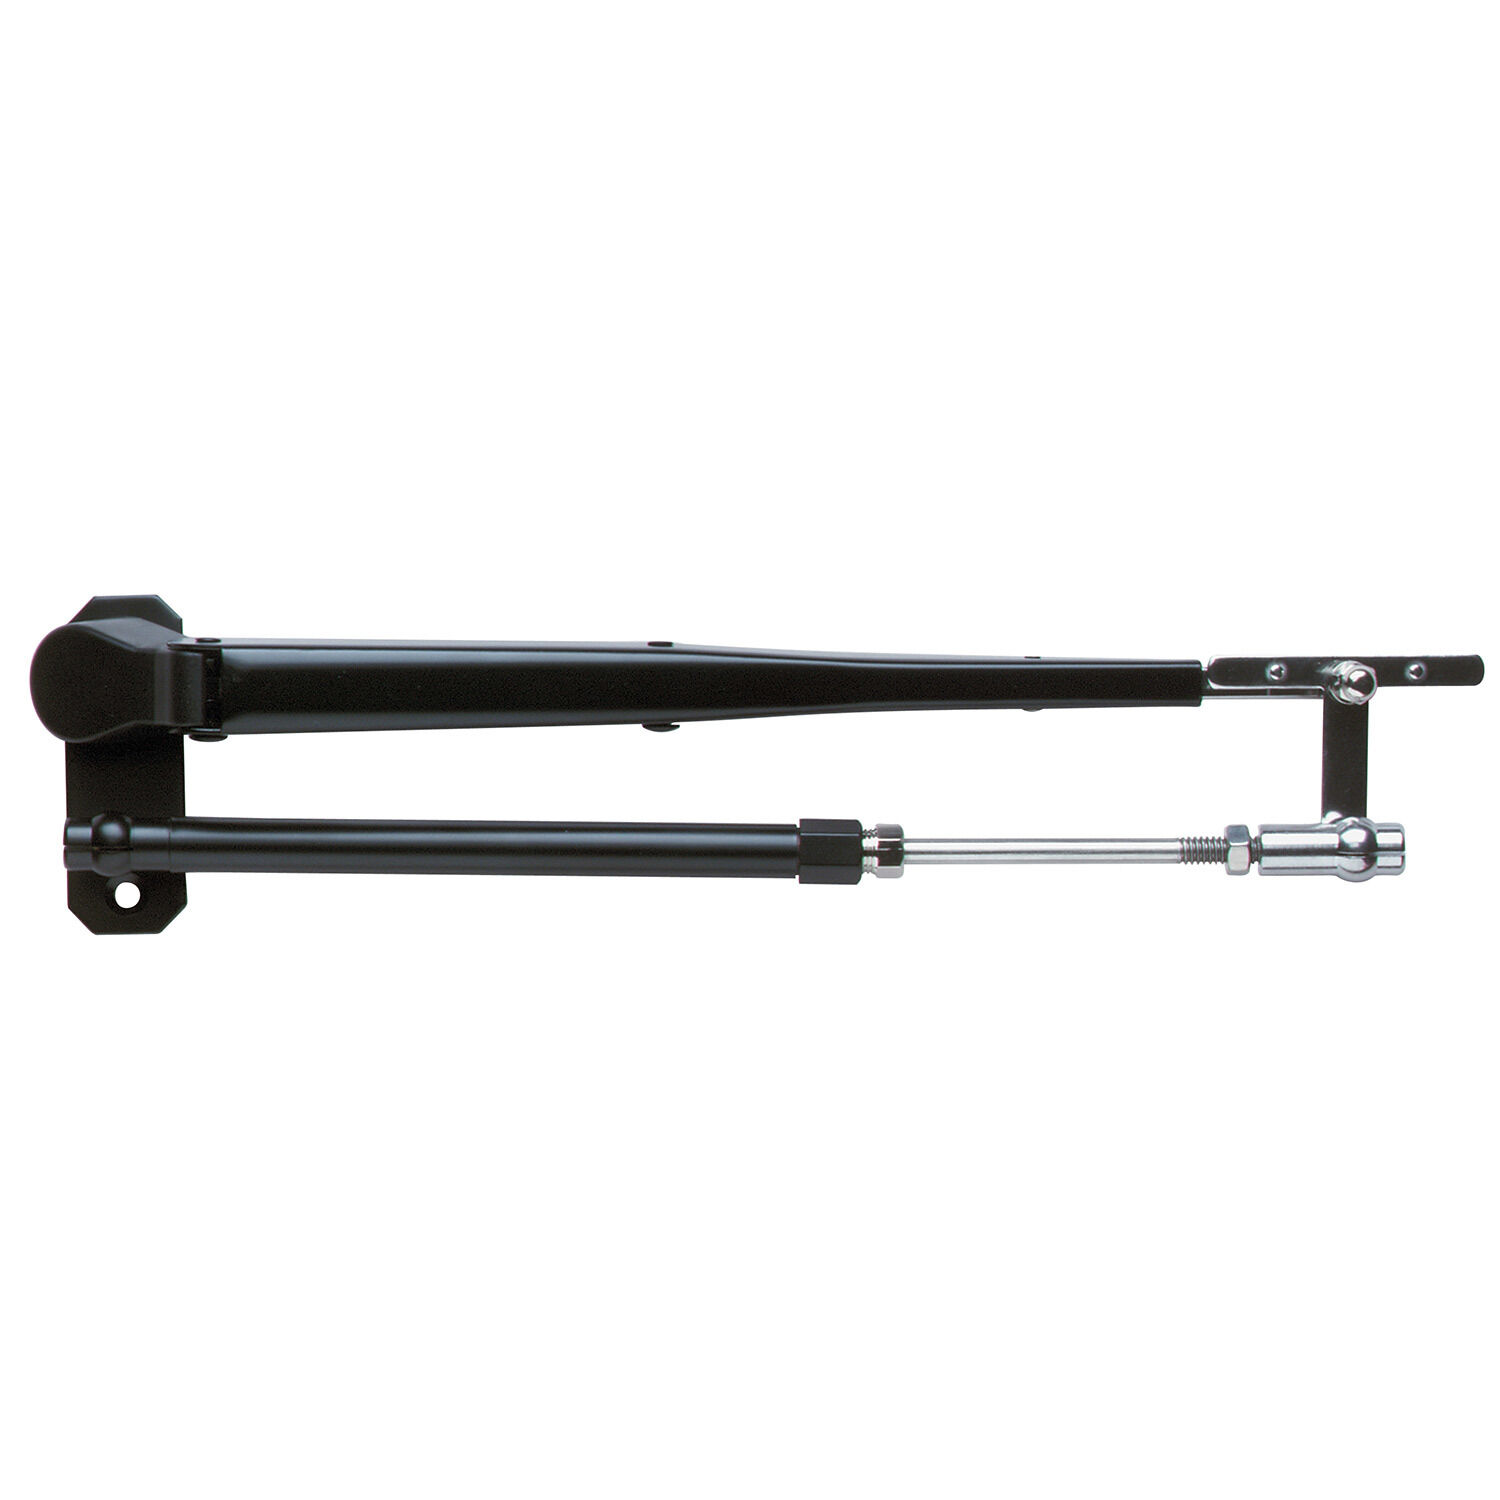 MARINCO Pantographic Deluxe Stainless Steel Wiper Arm, 17